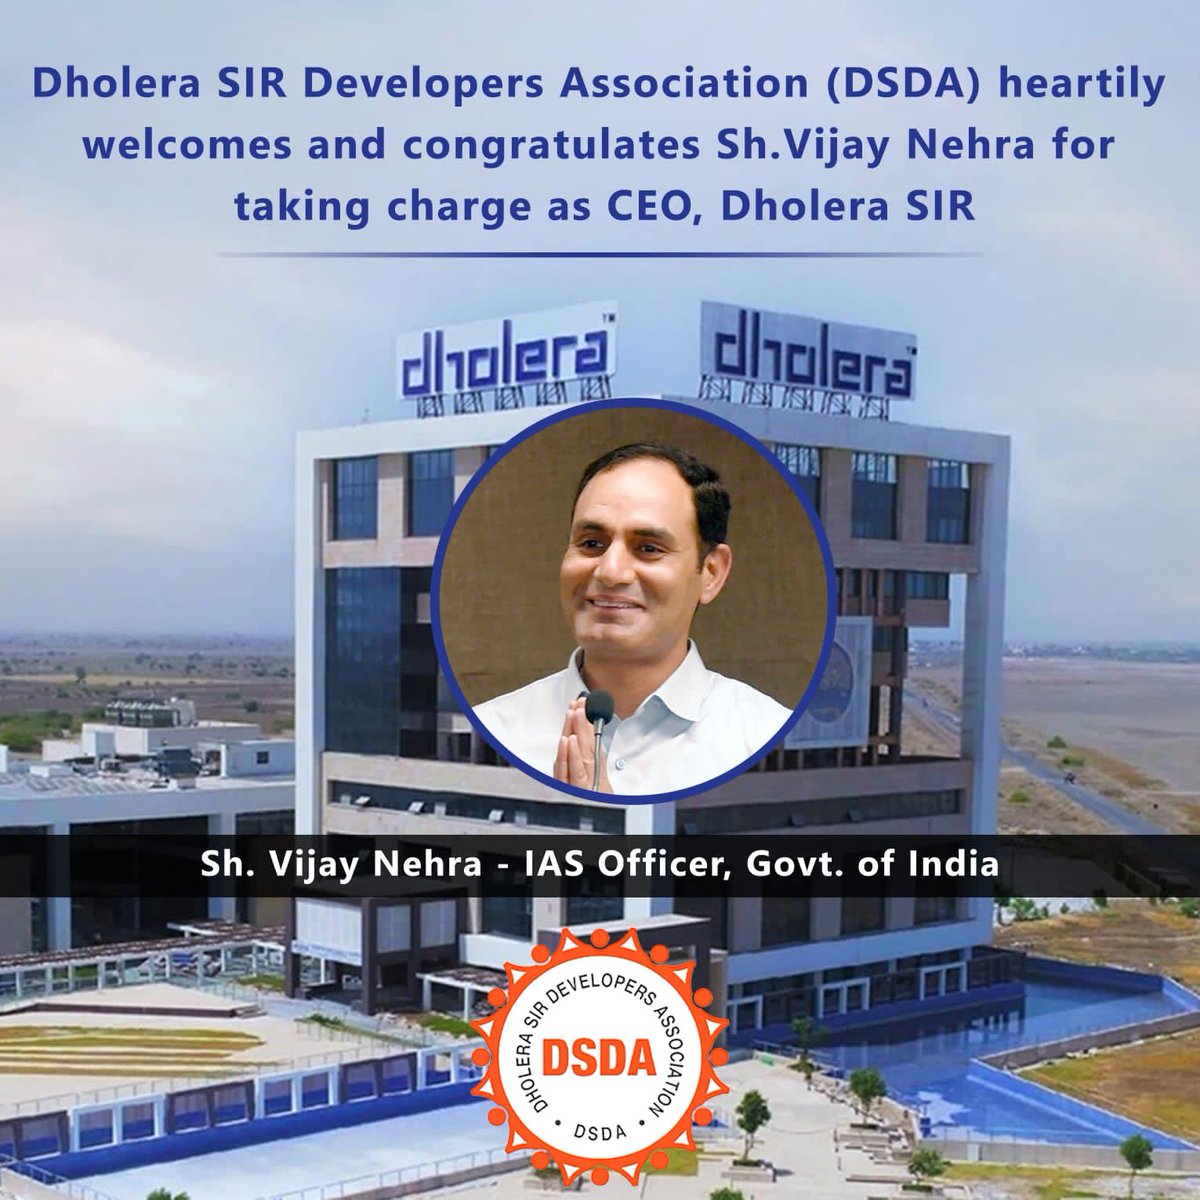 Vijay Nehra given charge of CEO of Dholera SIR💐

For more information on various investment options in Dholera SIR, get in touch with Tatvam Realty @ 7575006002

Visit Our Site bit.ly/3KLgNmG

#dholerasmartcity #dholerasir #dholera #smartcitydholera #investment